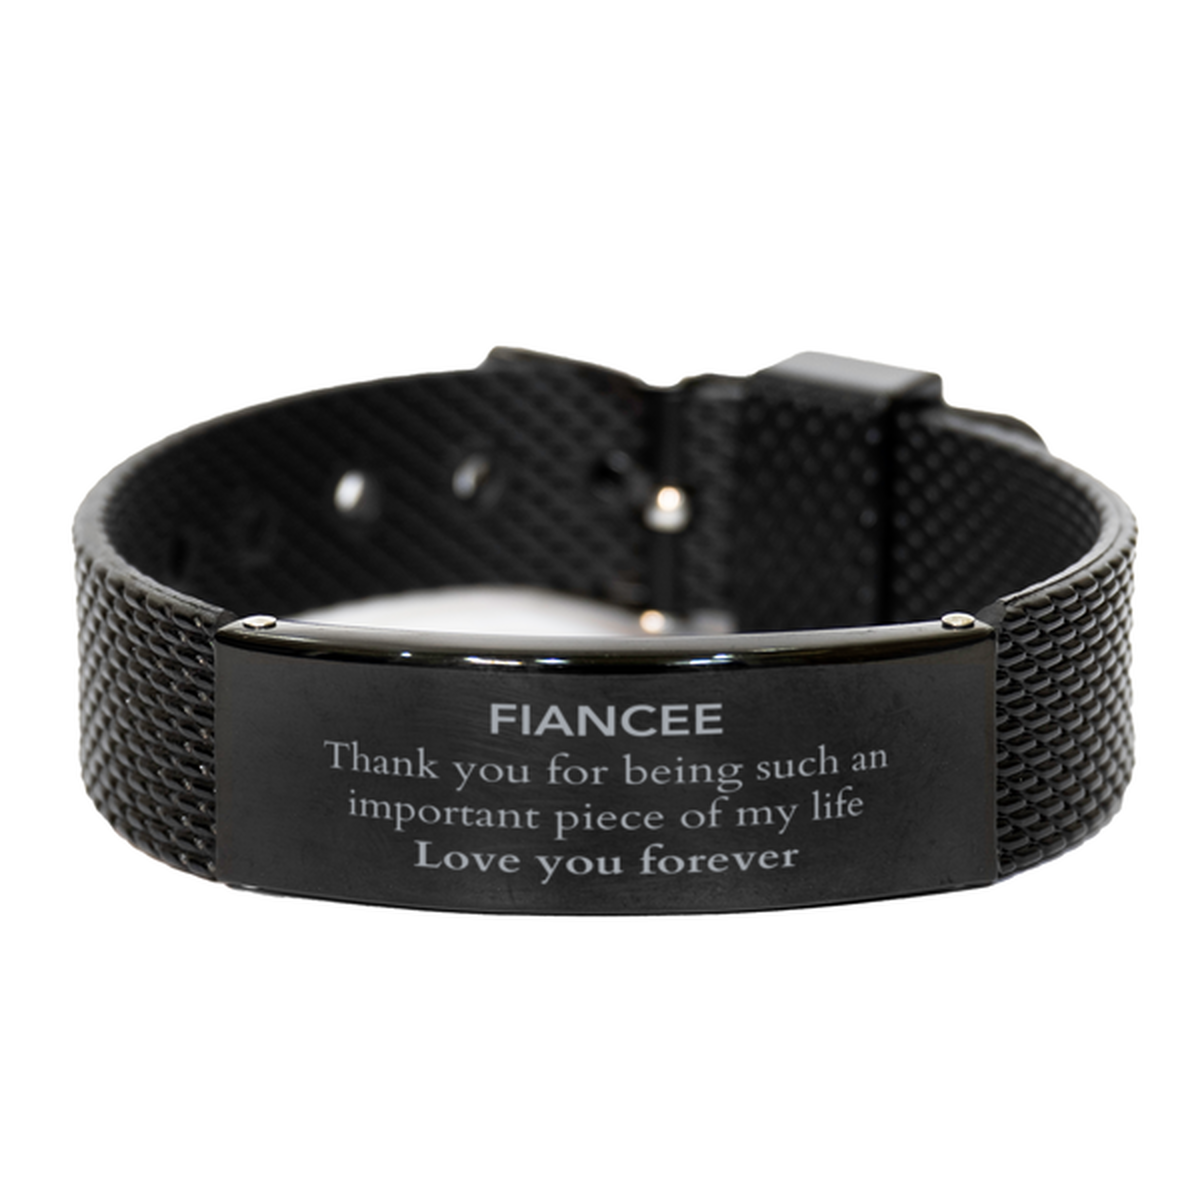 Appropriate Fiancee Black Shark Mesh Bracelet Epic Birthday Gifts for Fiancee Thank you for being such an important piece of my life Fiancee Christmas Mothers Fathers Day